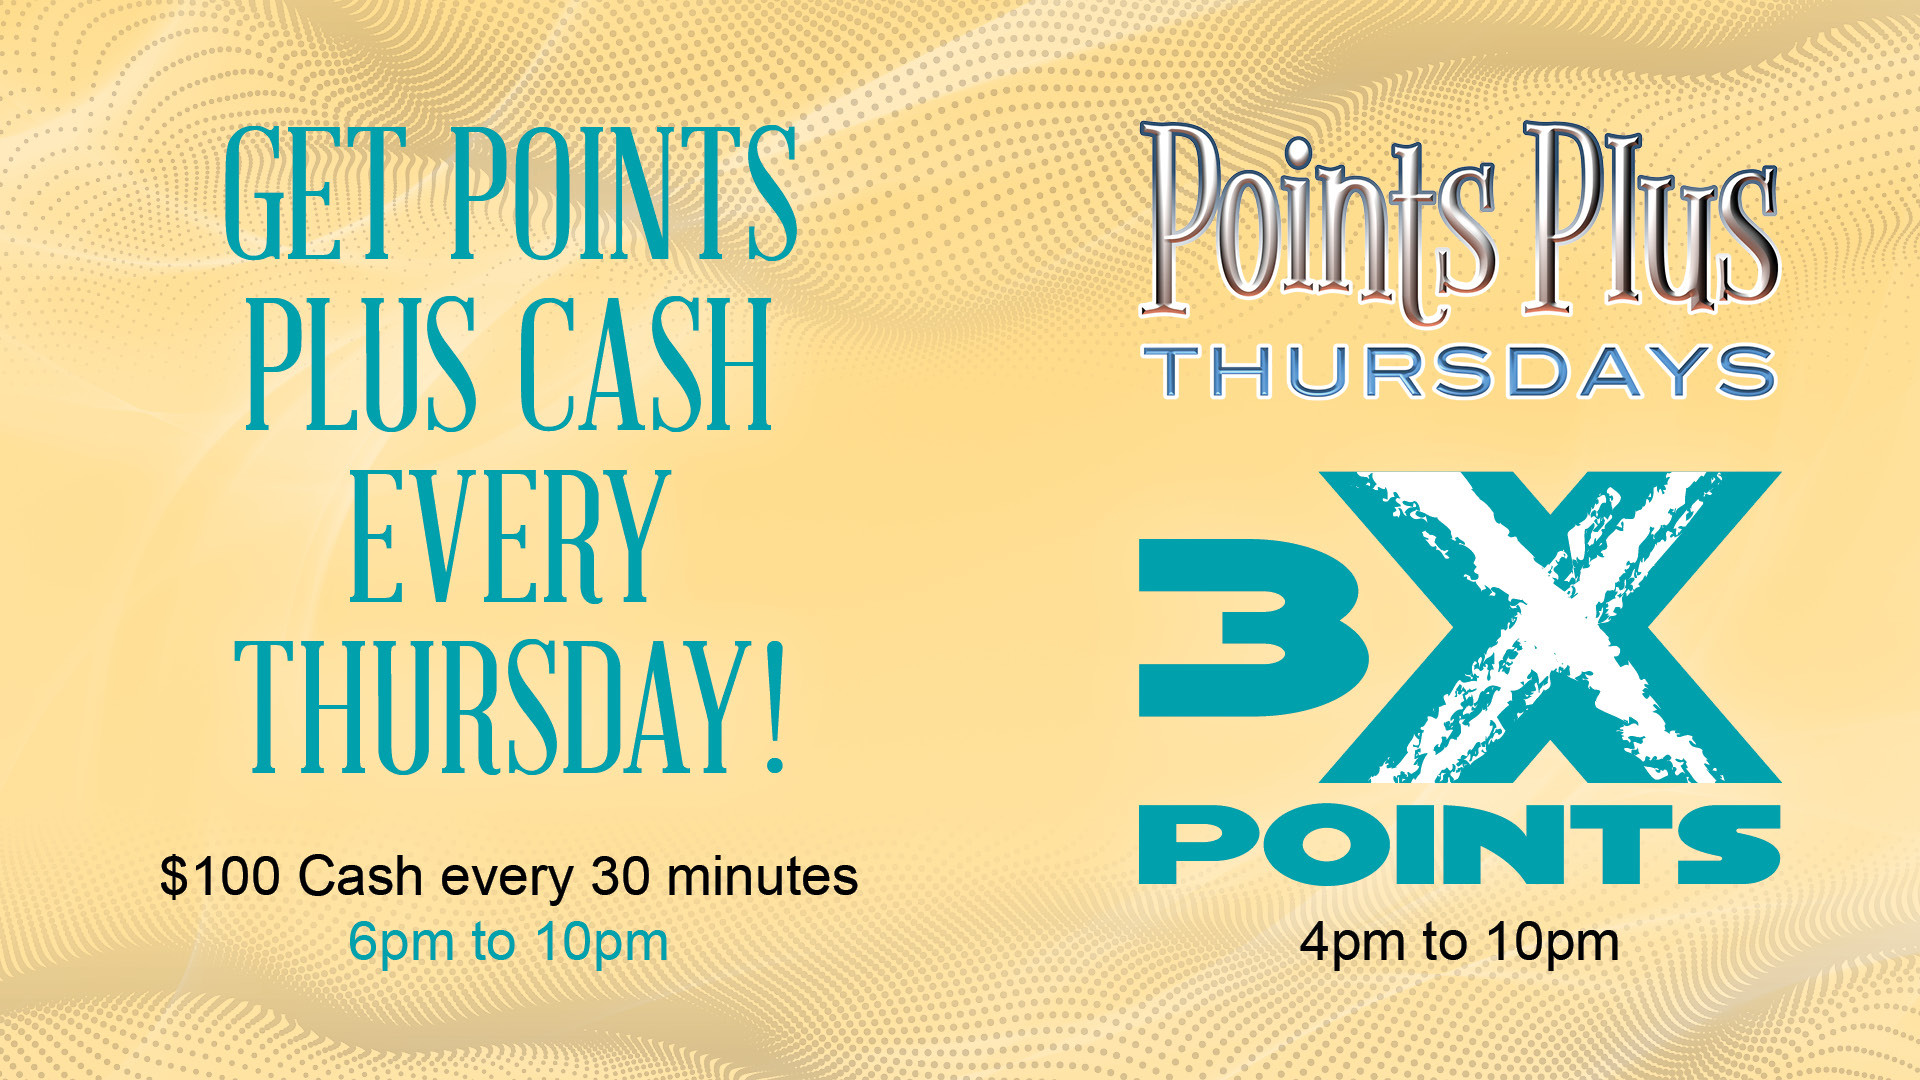 Get Points plus cash every Thursday! $100 cash every 30 minutes 6pm to 10pm. 3x points 4pm to 10pm.